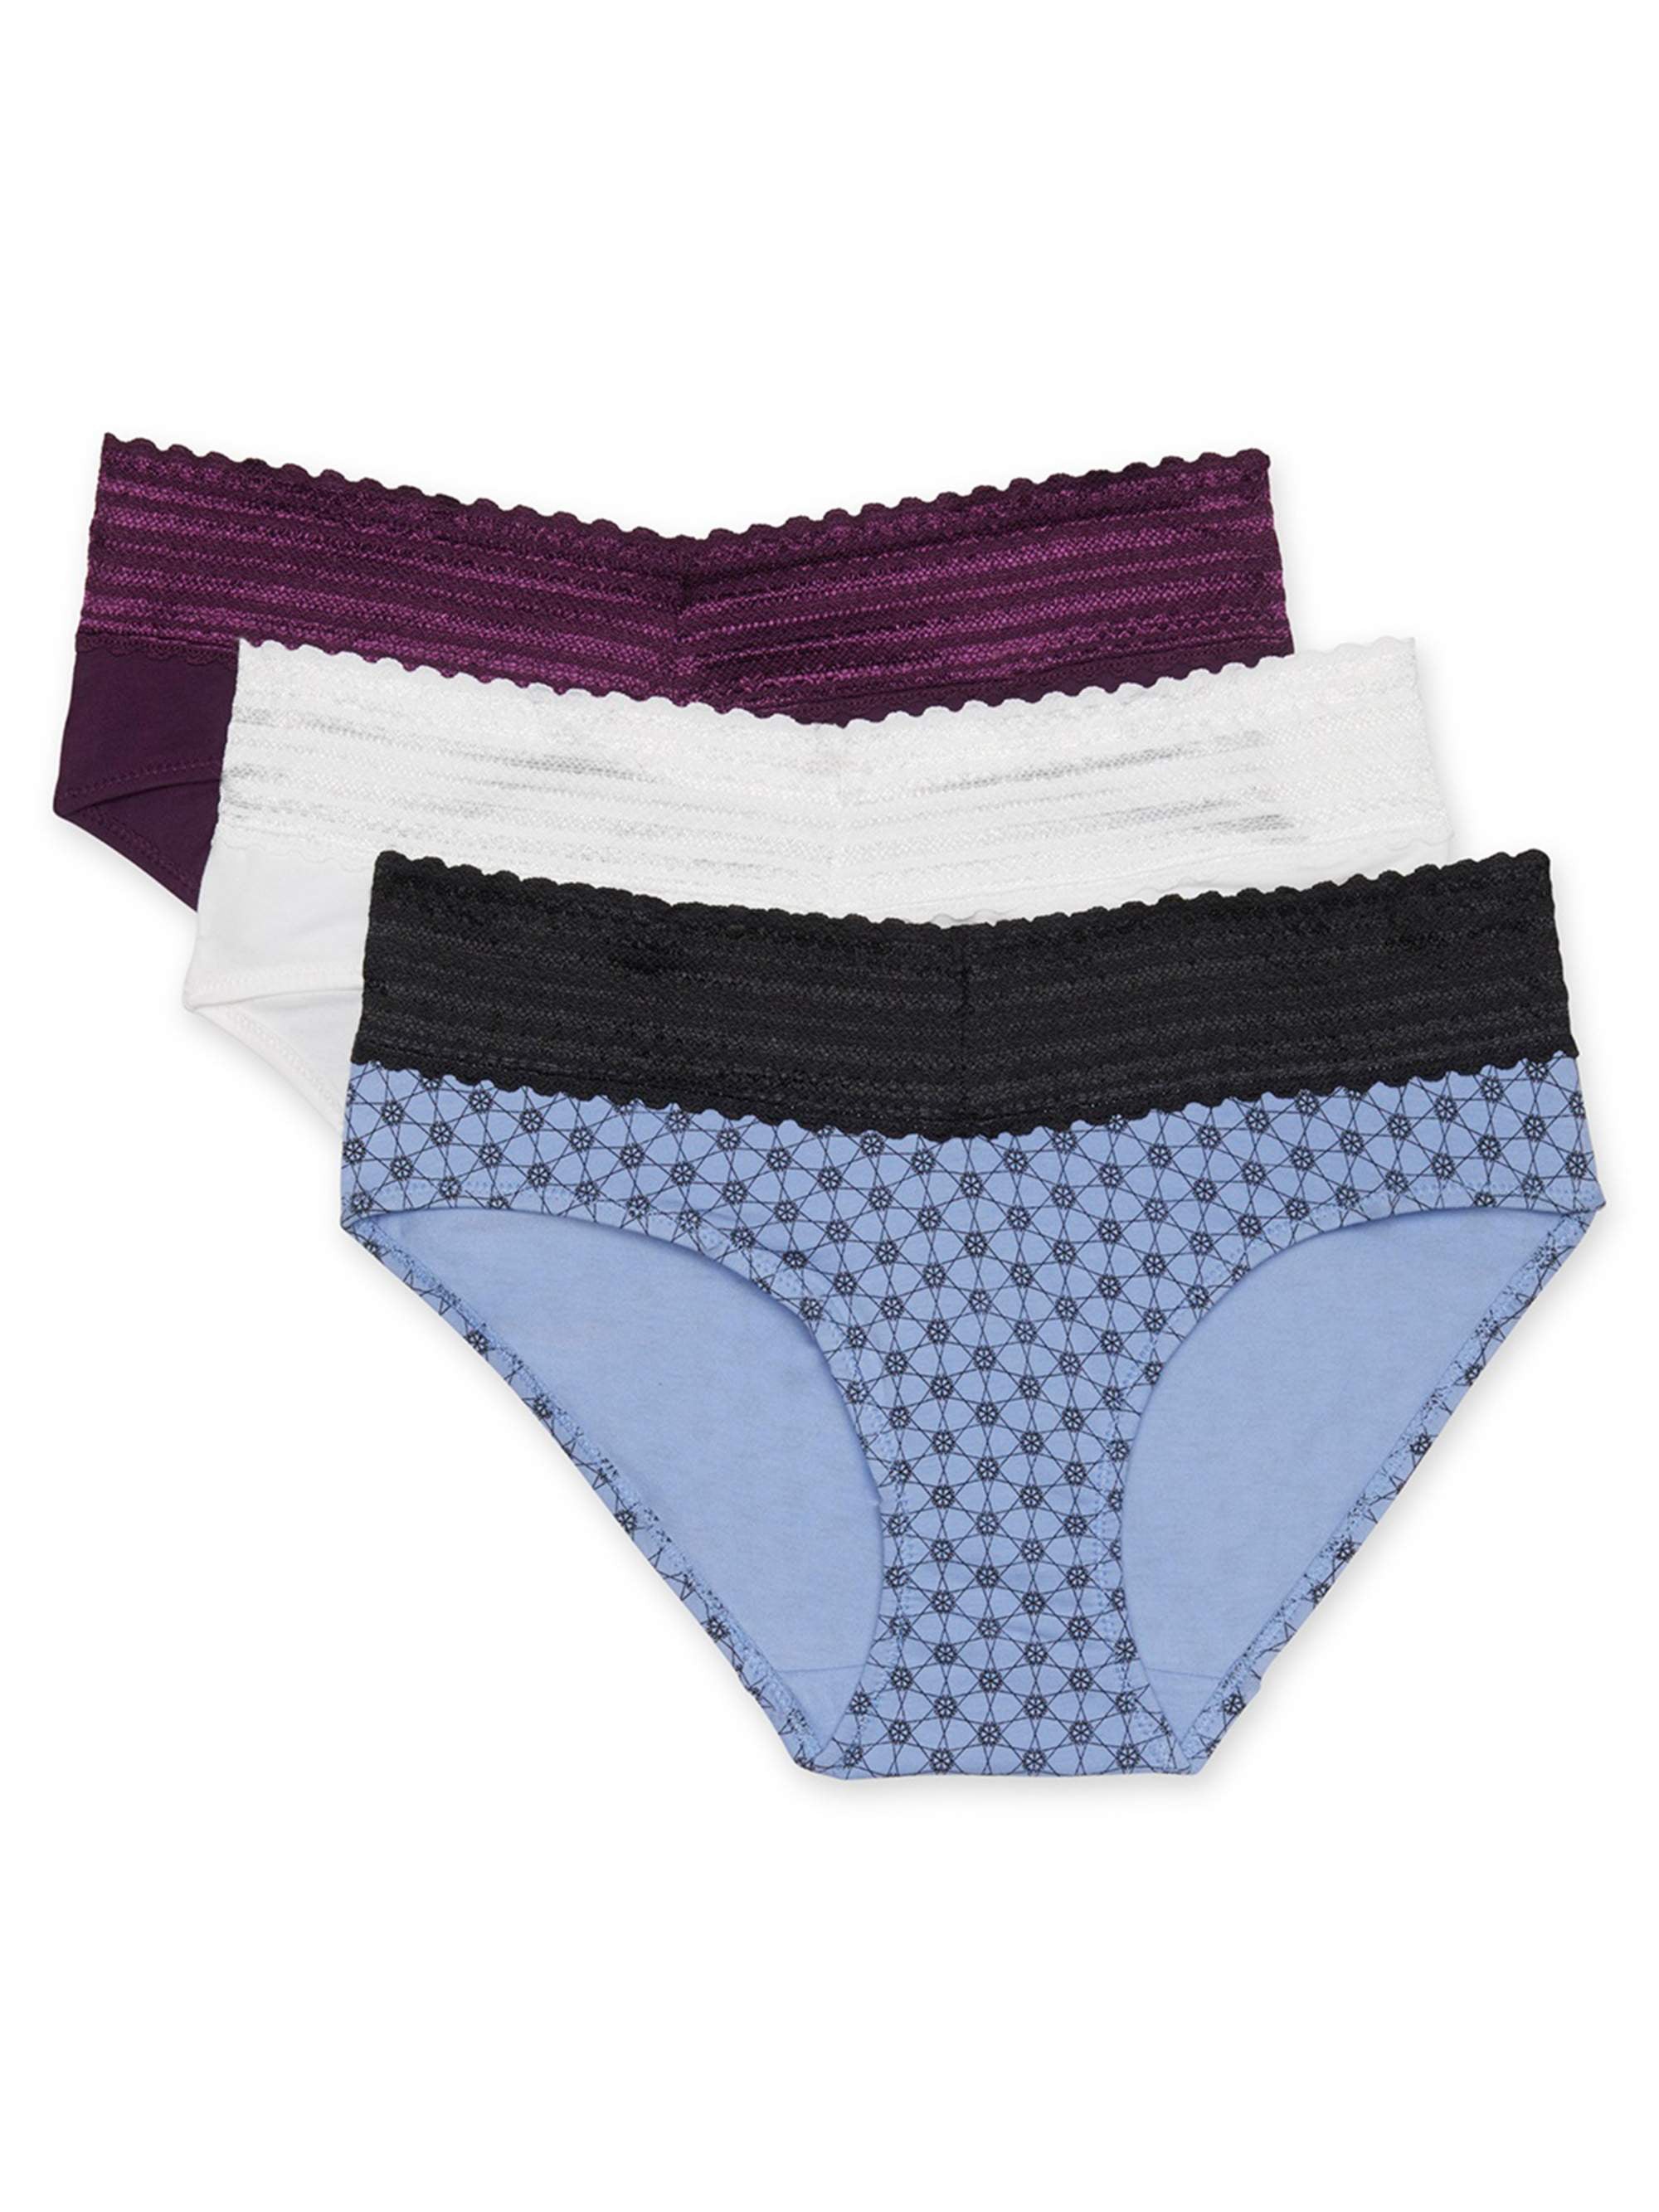 Fruit of the Loom Women's No Show Hipster Underwear, 3 Pack, Sizes 5-9